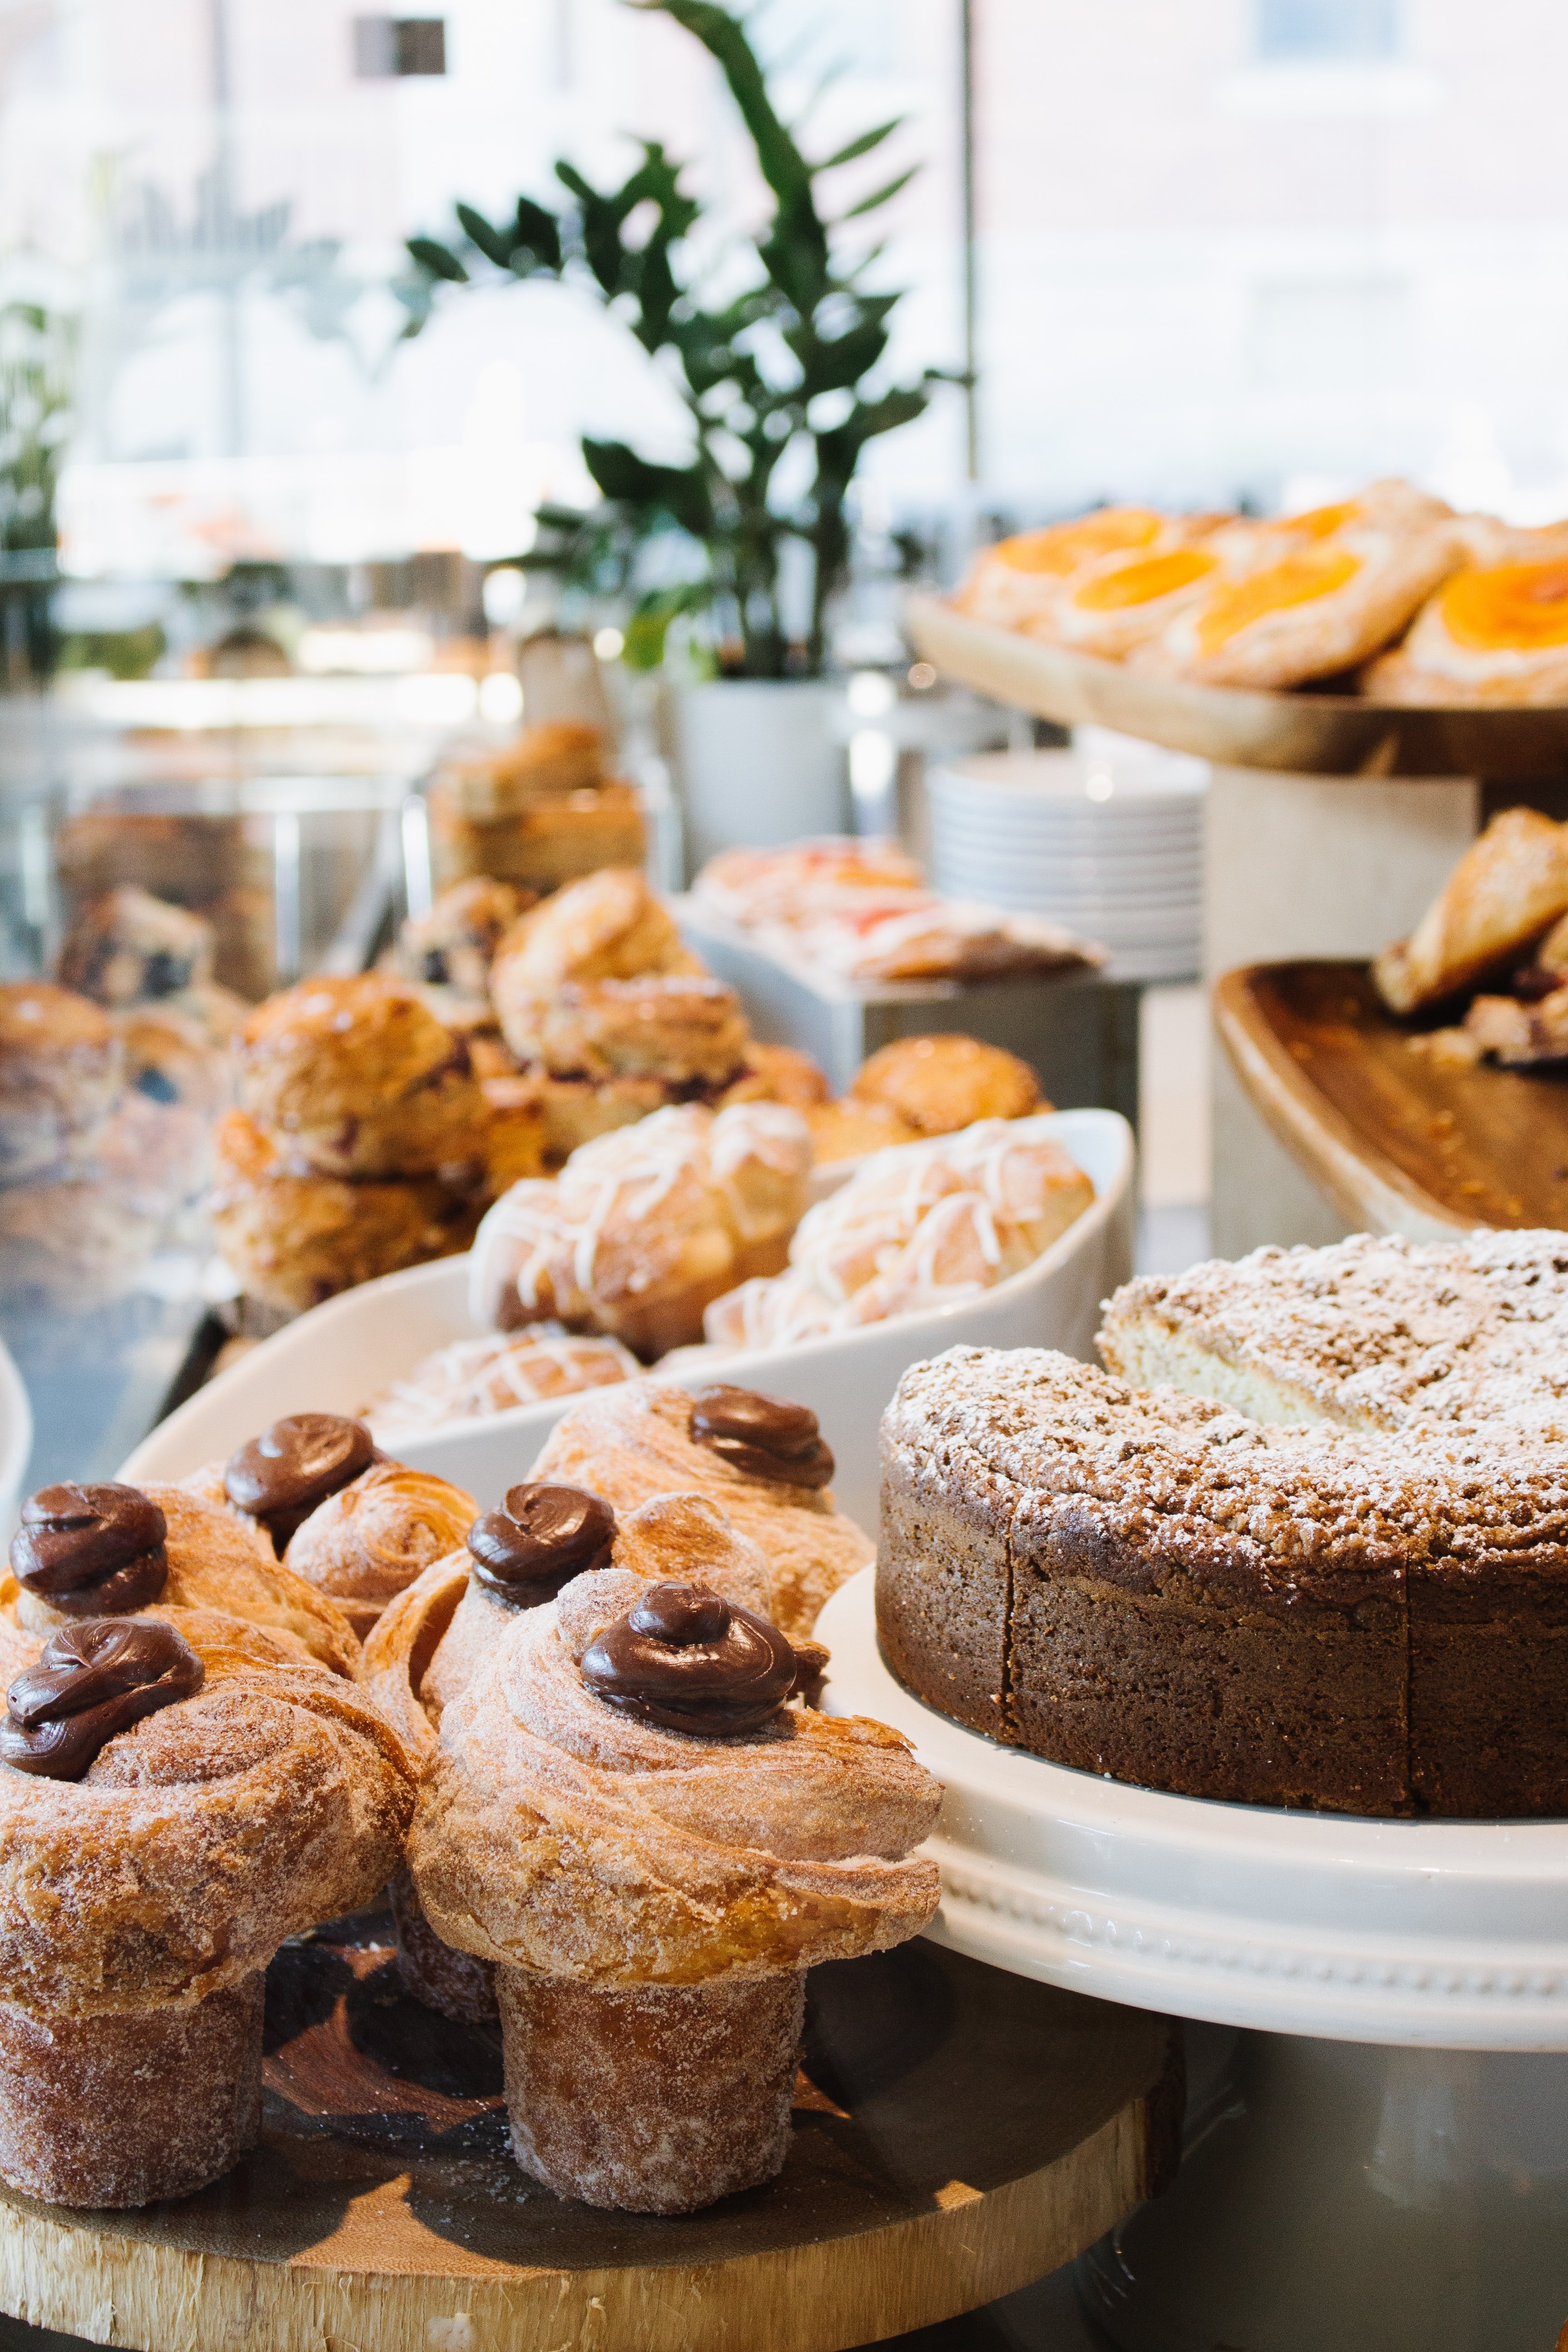 Edith started her pastry buisness | Photo: Unsplash